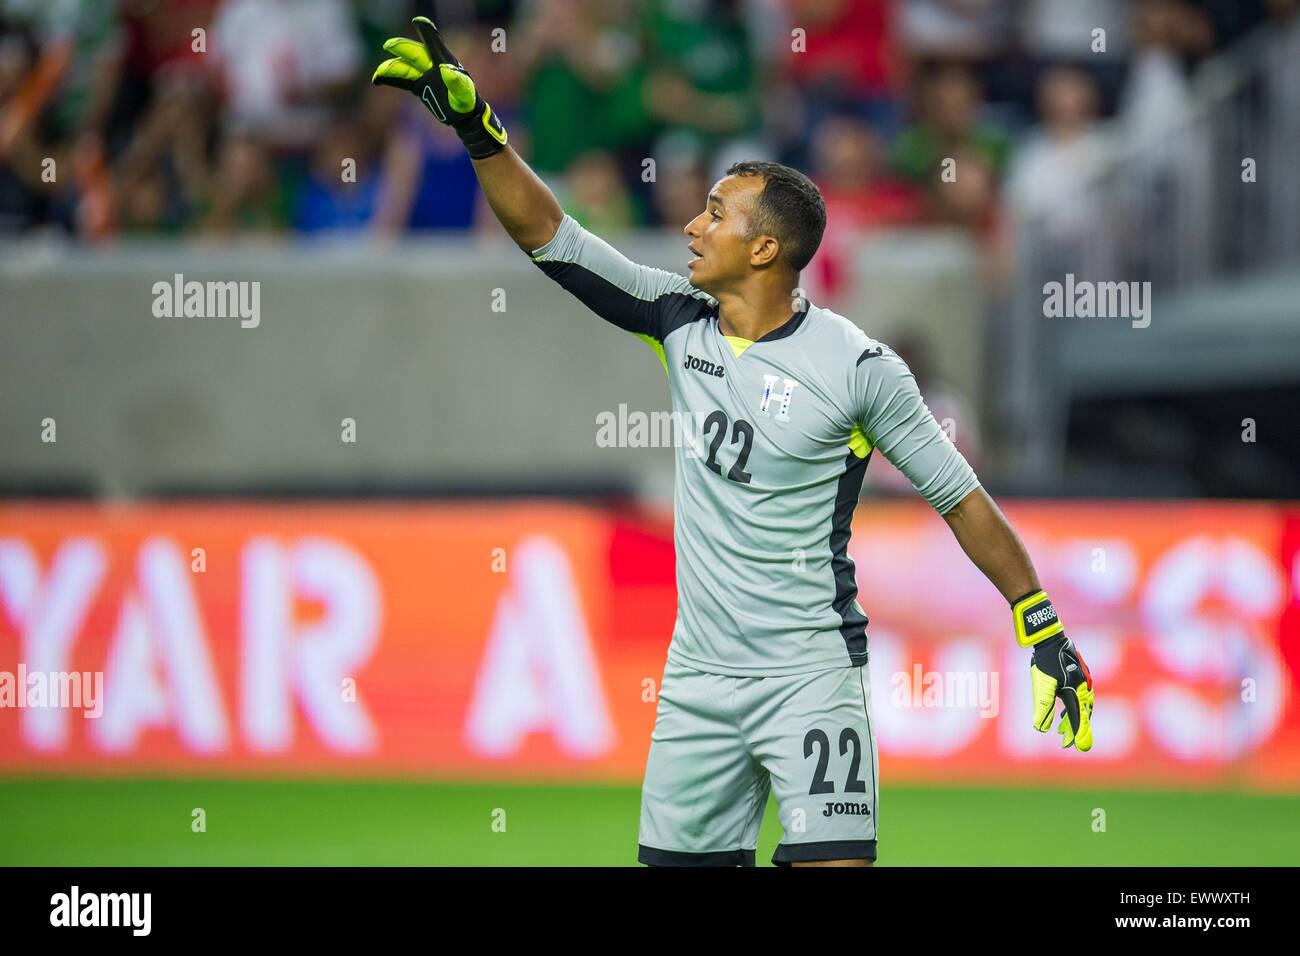 Houston, TX, USA. 1st July, 2015. Honduras goalkeeper Donis Escober (22) gestures to teammates during the 1st half of an international soccer match between Honduras and Mexico at NRG Stadium in Houston, TX. Trask Smith/CSM/Alamy Live News Stock Photo